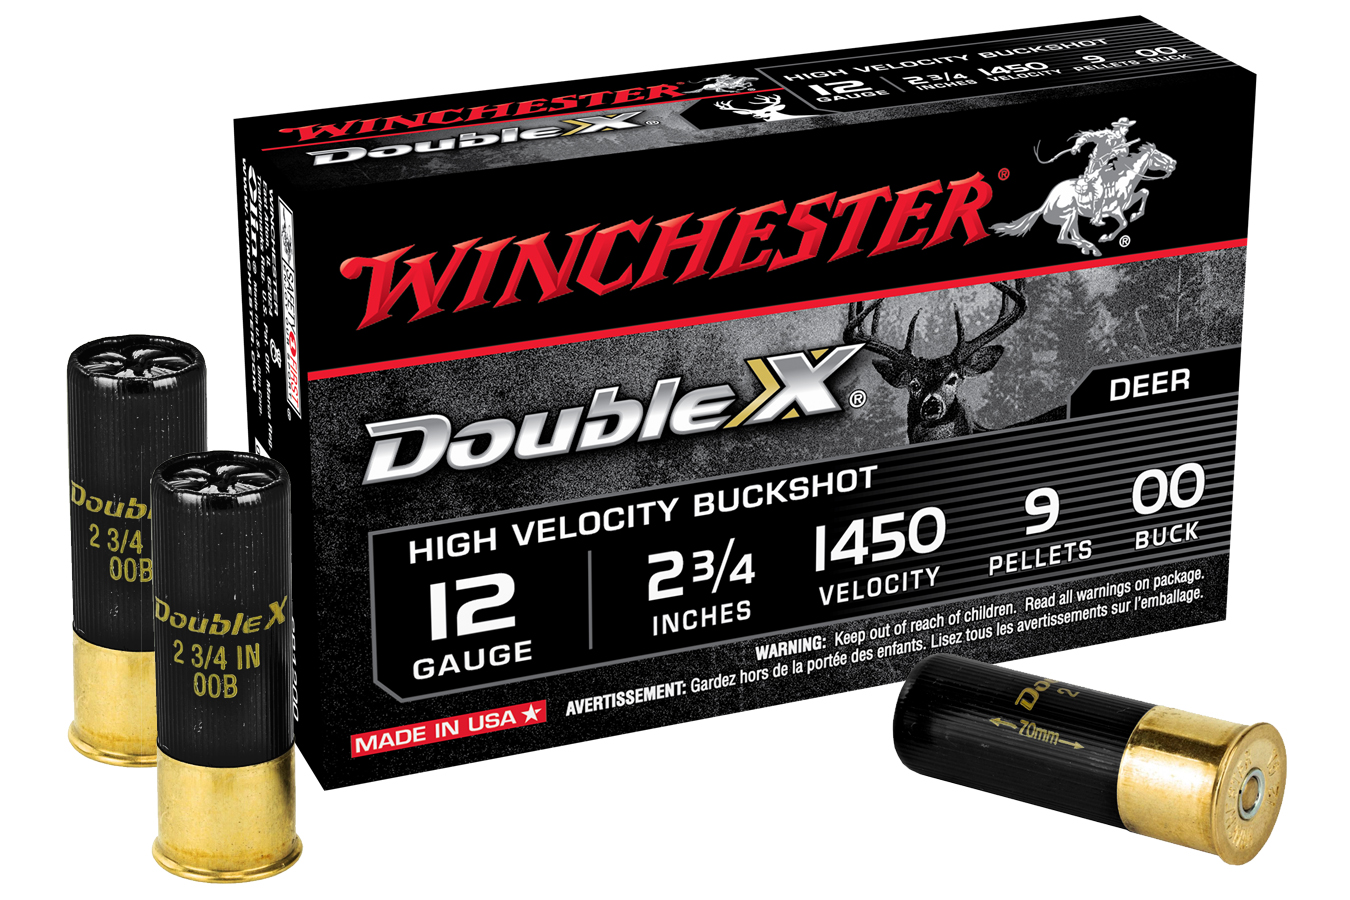 WINCHESTER AMMO 12 GA 2-3/4 IN 9 PELLETS HV PLATED BUFFERED SHOT